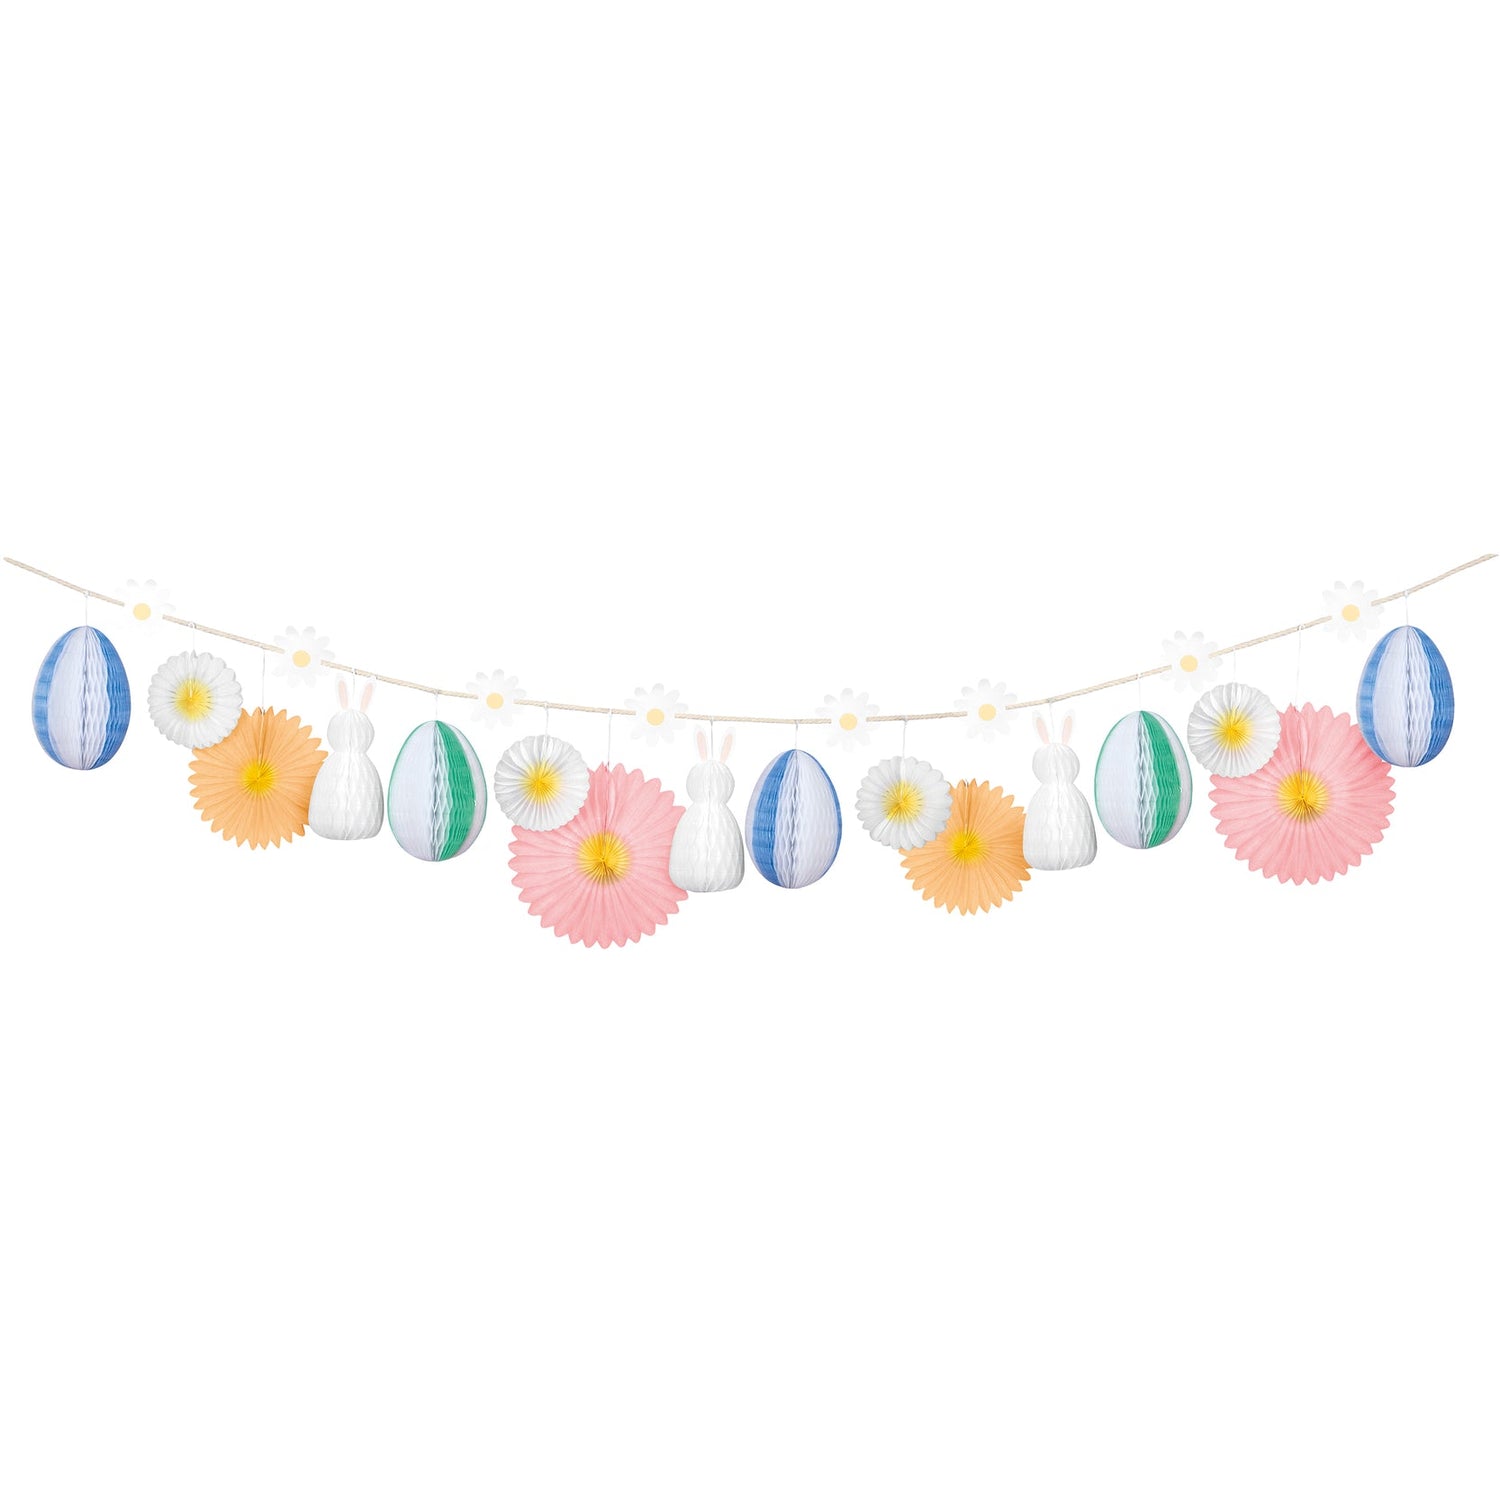 A festive Honey Easter Bunny Garland adorned with colorful Easter eggs, set against a crisp white background by Meri Meri.